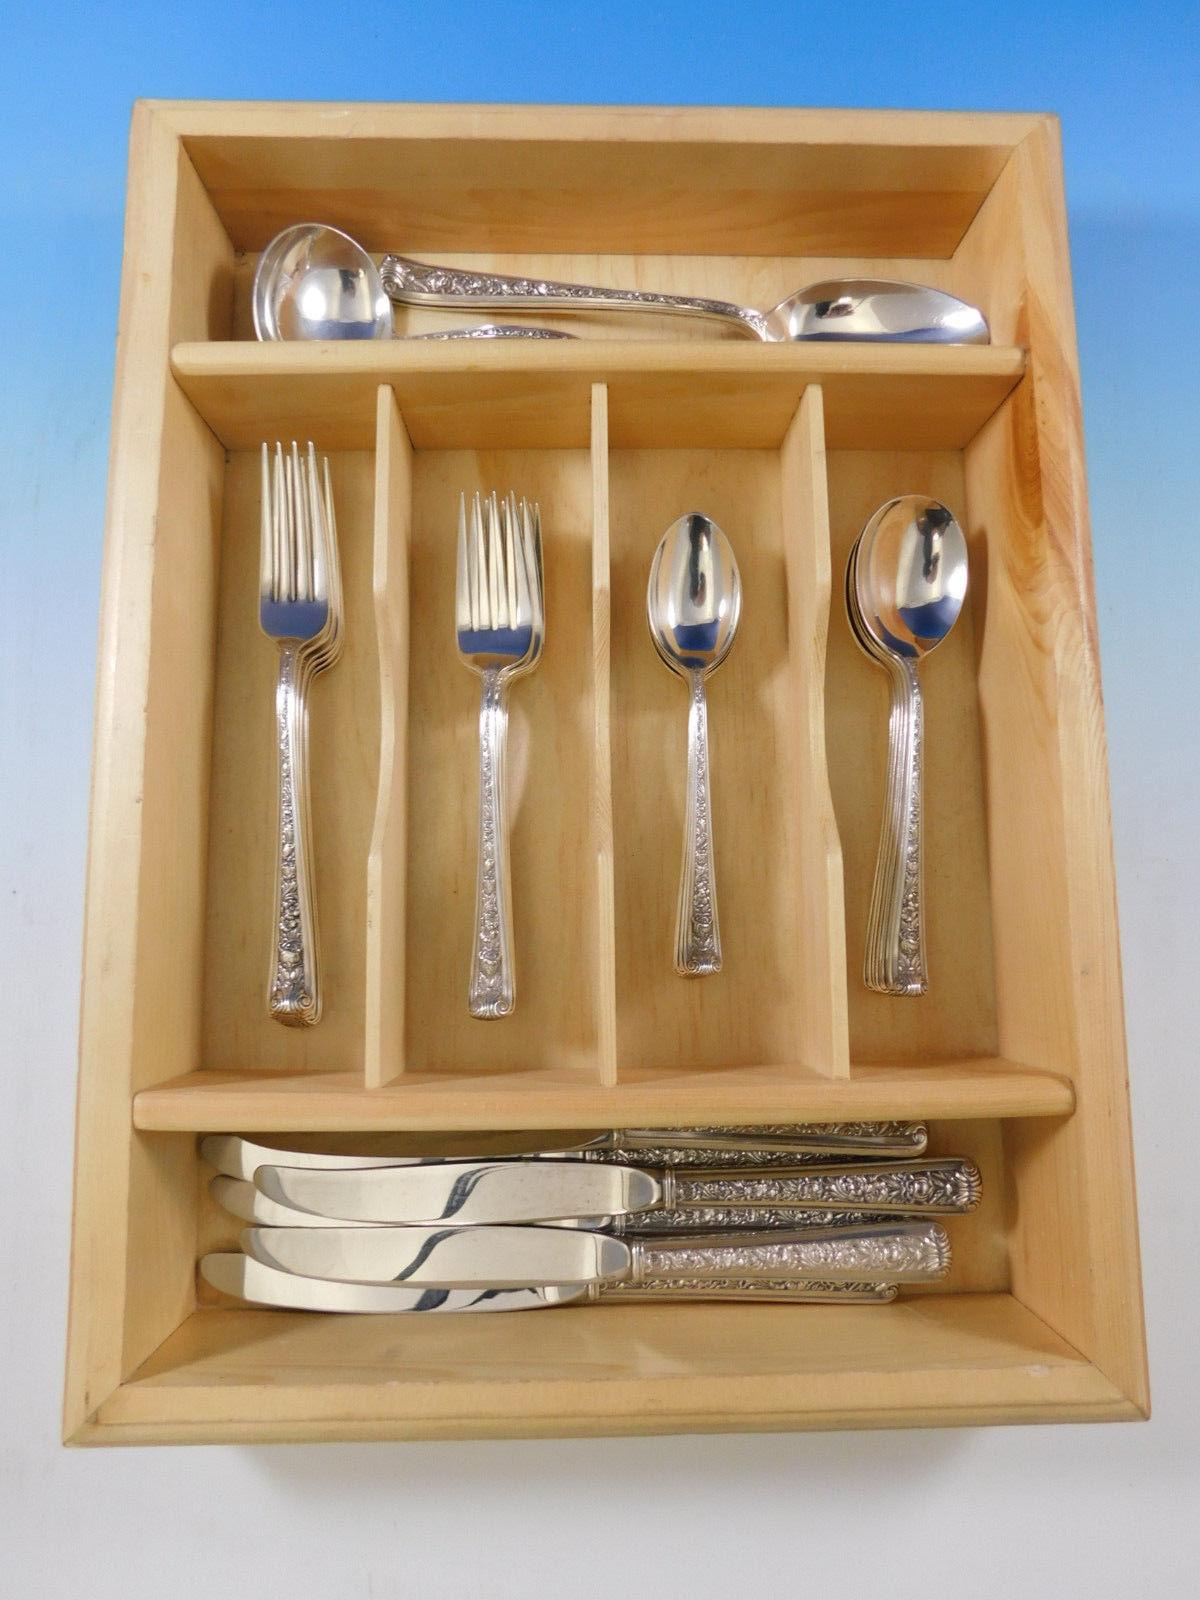 Windsor Rose by Watson sterling silver flatware set, 33 pieces. Great starter set! This set includes:

Six knives, 8 7/8